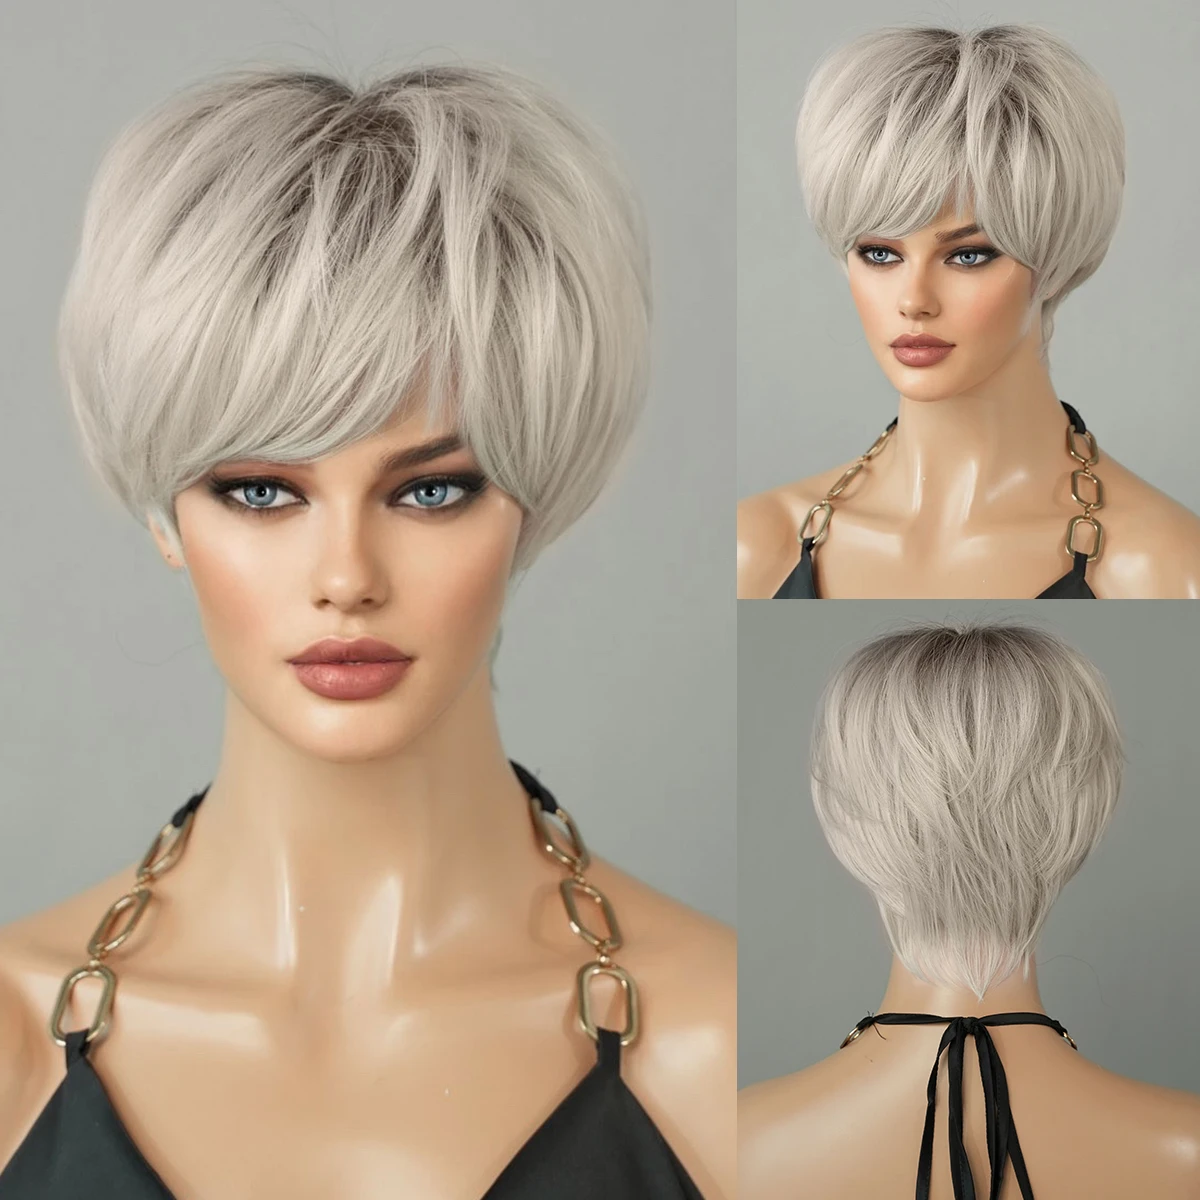 PARK YUN Silver Ash Short Straight Champagne Bob Wig for Women High Density Synthetic Hair Wigs with Dark Roots 10Inches